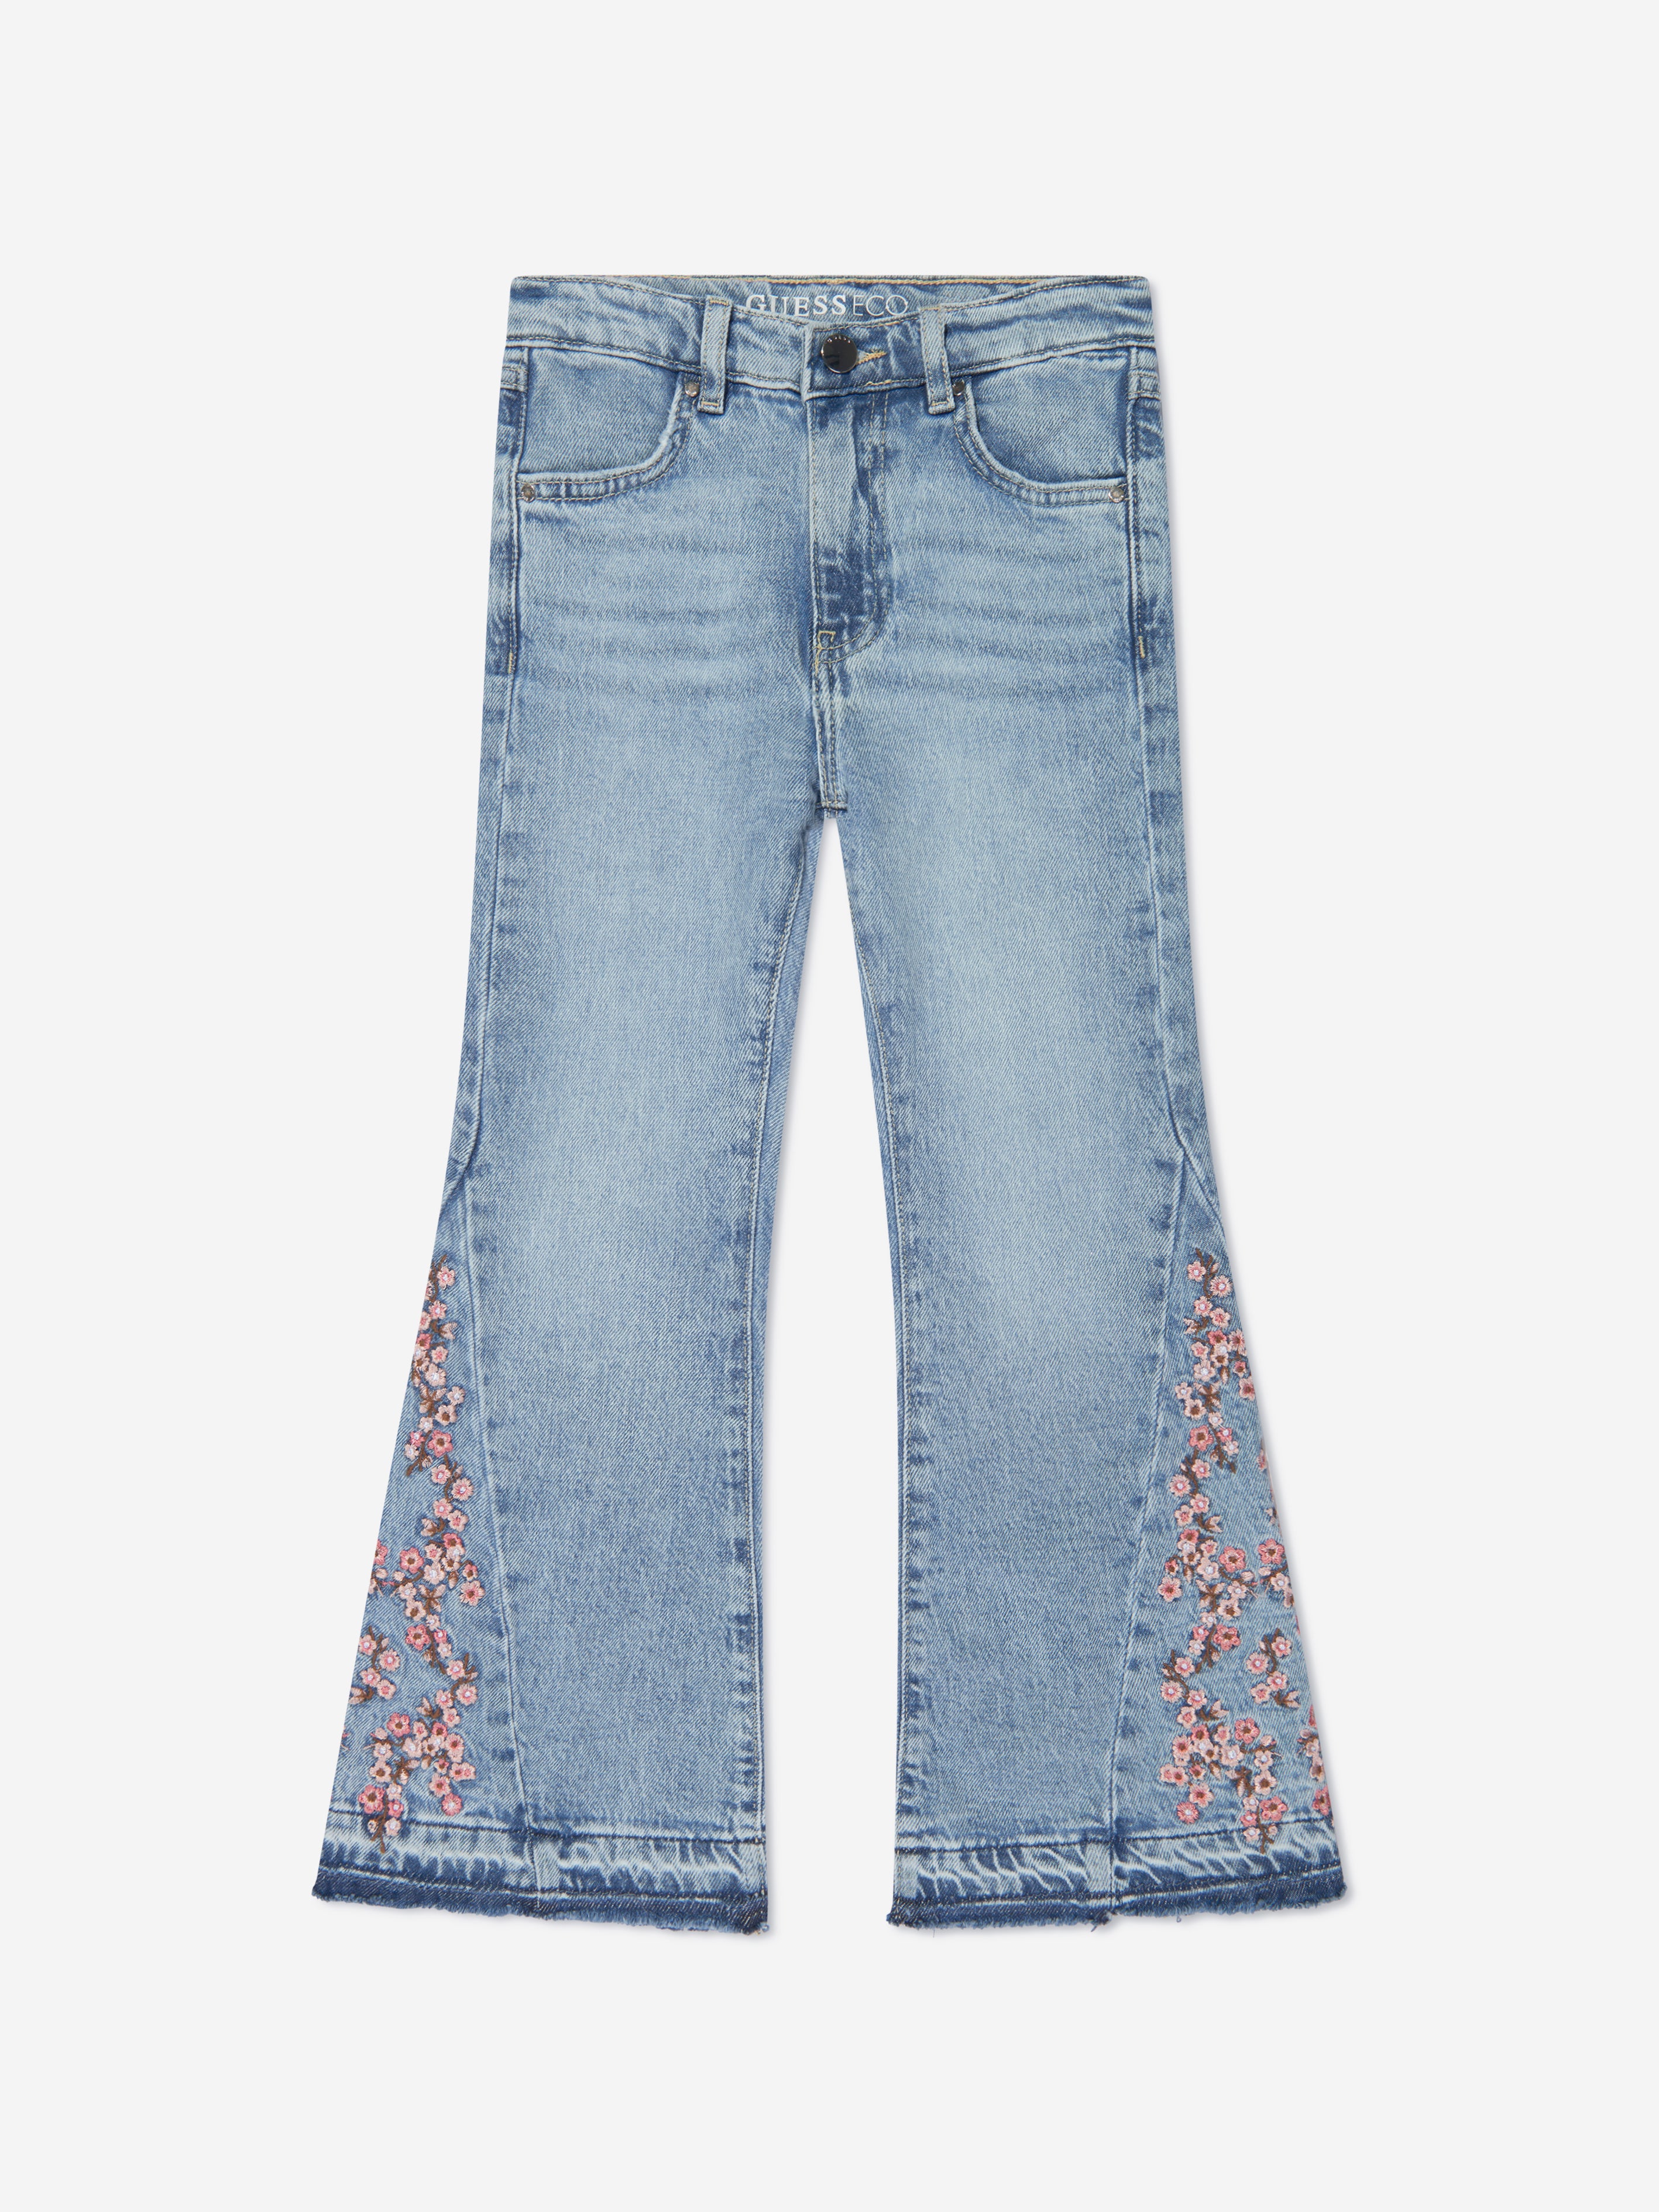 Flared Jeans: Wide-Leg Denim Of Enduring Style